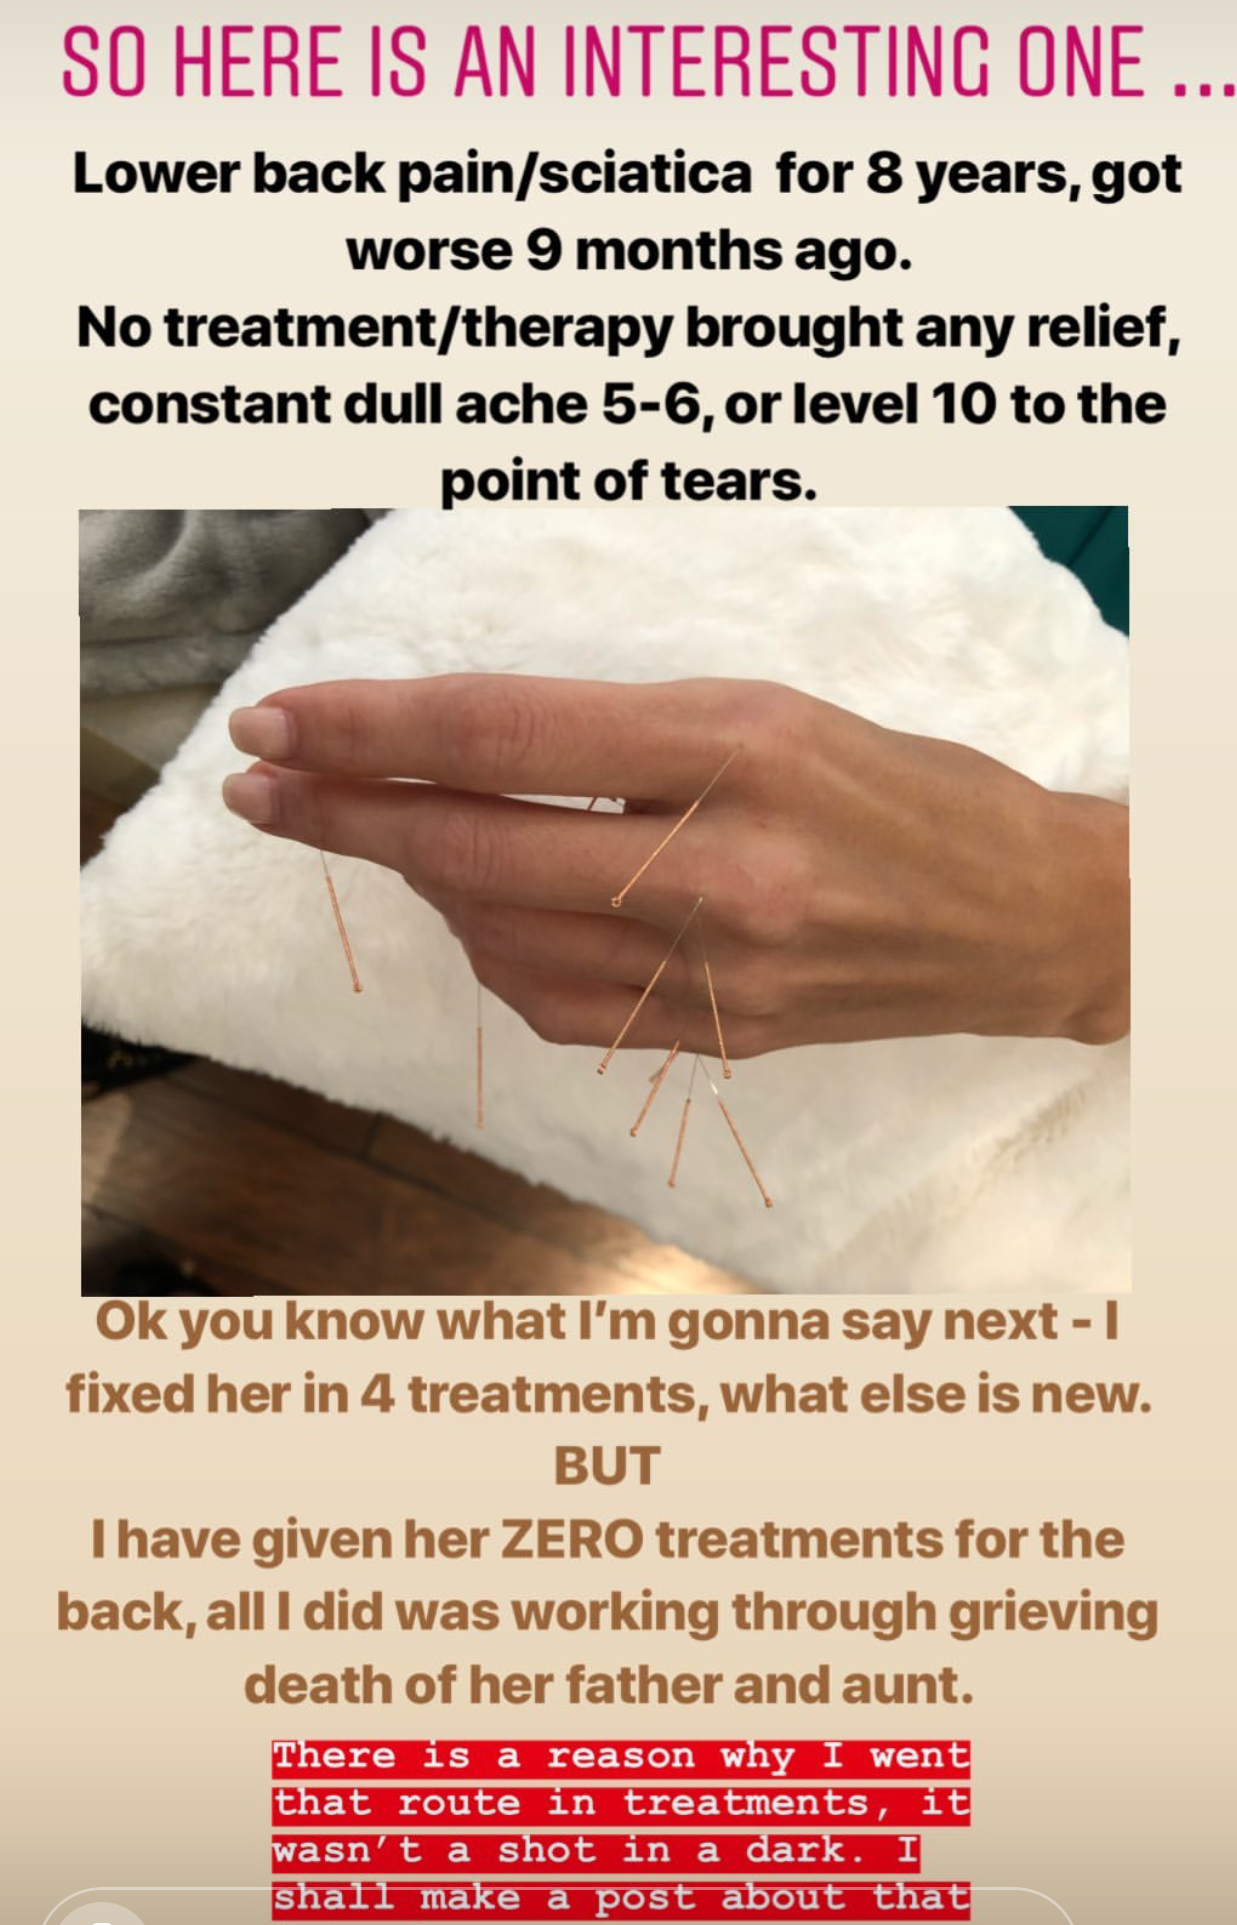  SuJok acupuncture treatment in Vancouver used for patients with pain syndrome, in this case: patient with lower back pain caused by the sciatica nerve. Treatment resulted in the successful reduction of severe pain through working the emotional roots